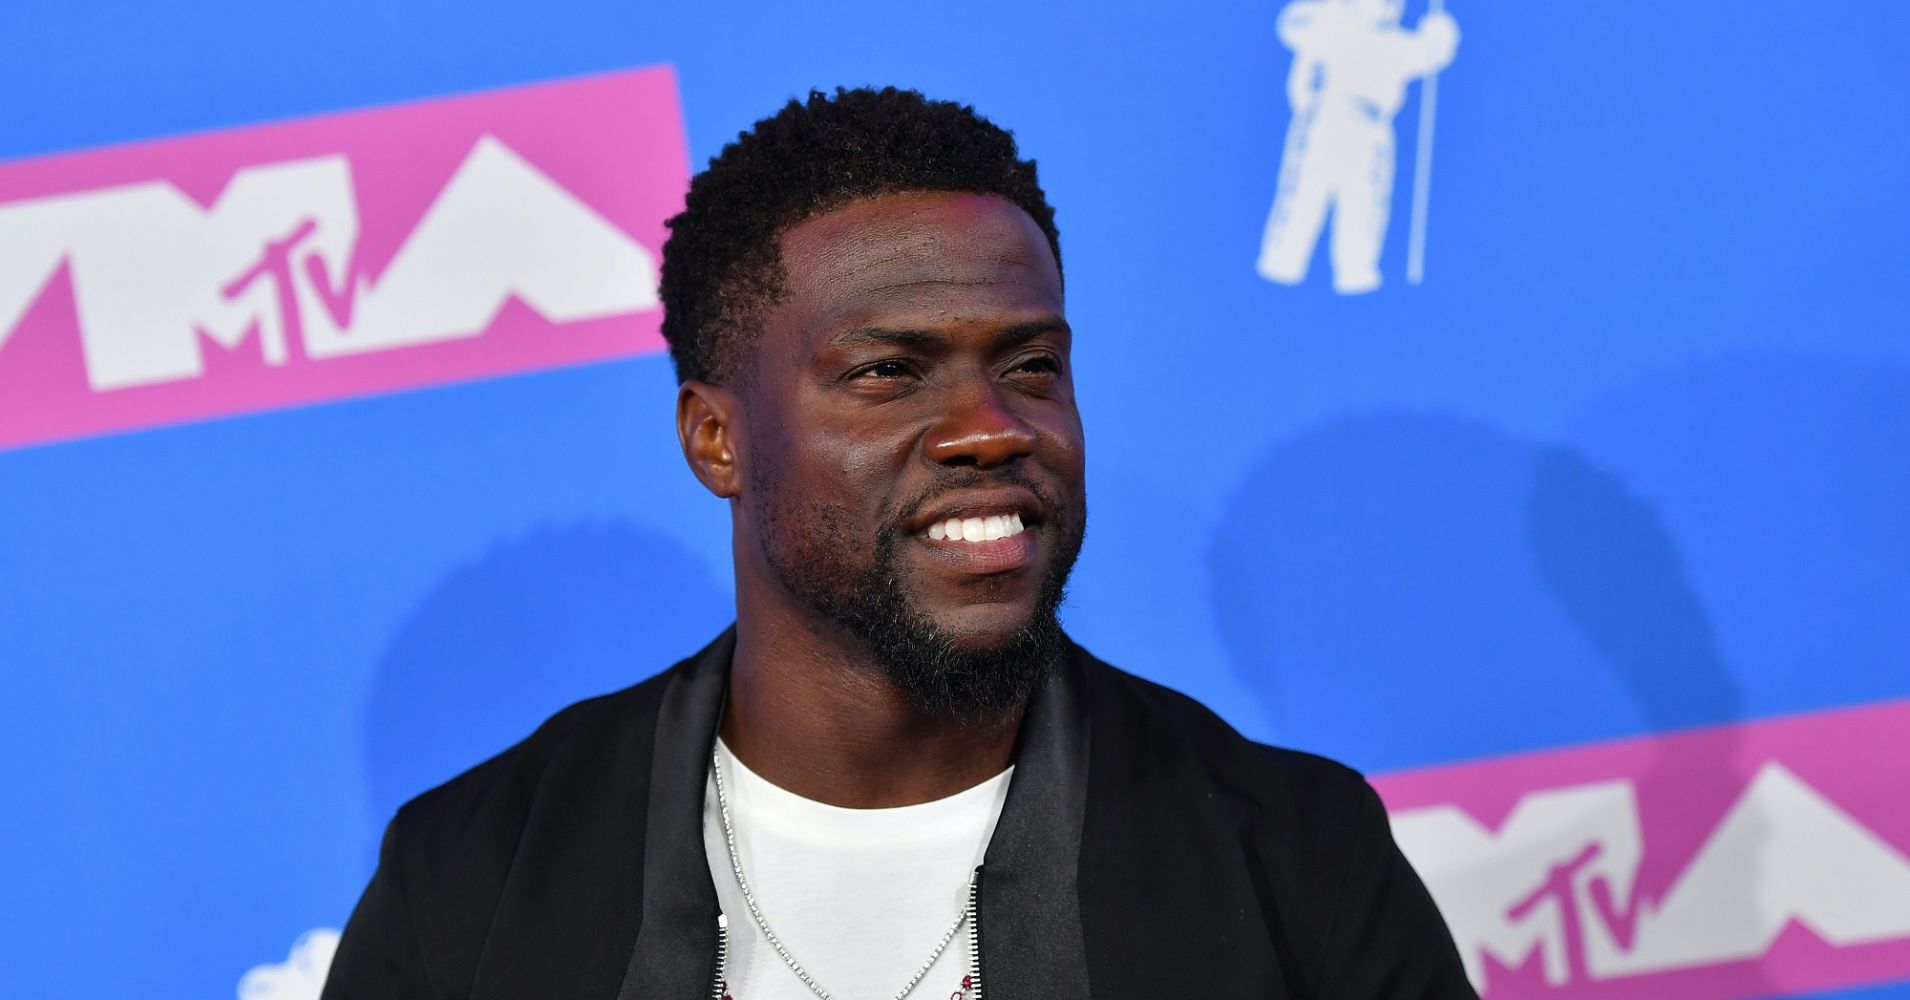 Kevin Hart  Expand Portfolio With Latest Investment Into Sports Nutrition Company Nutrabolt